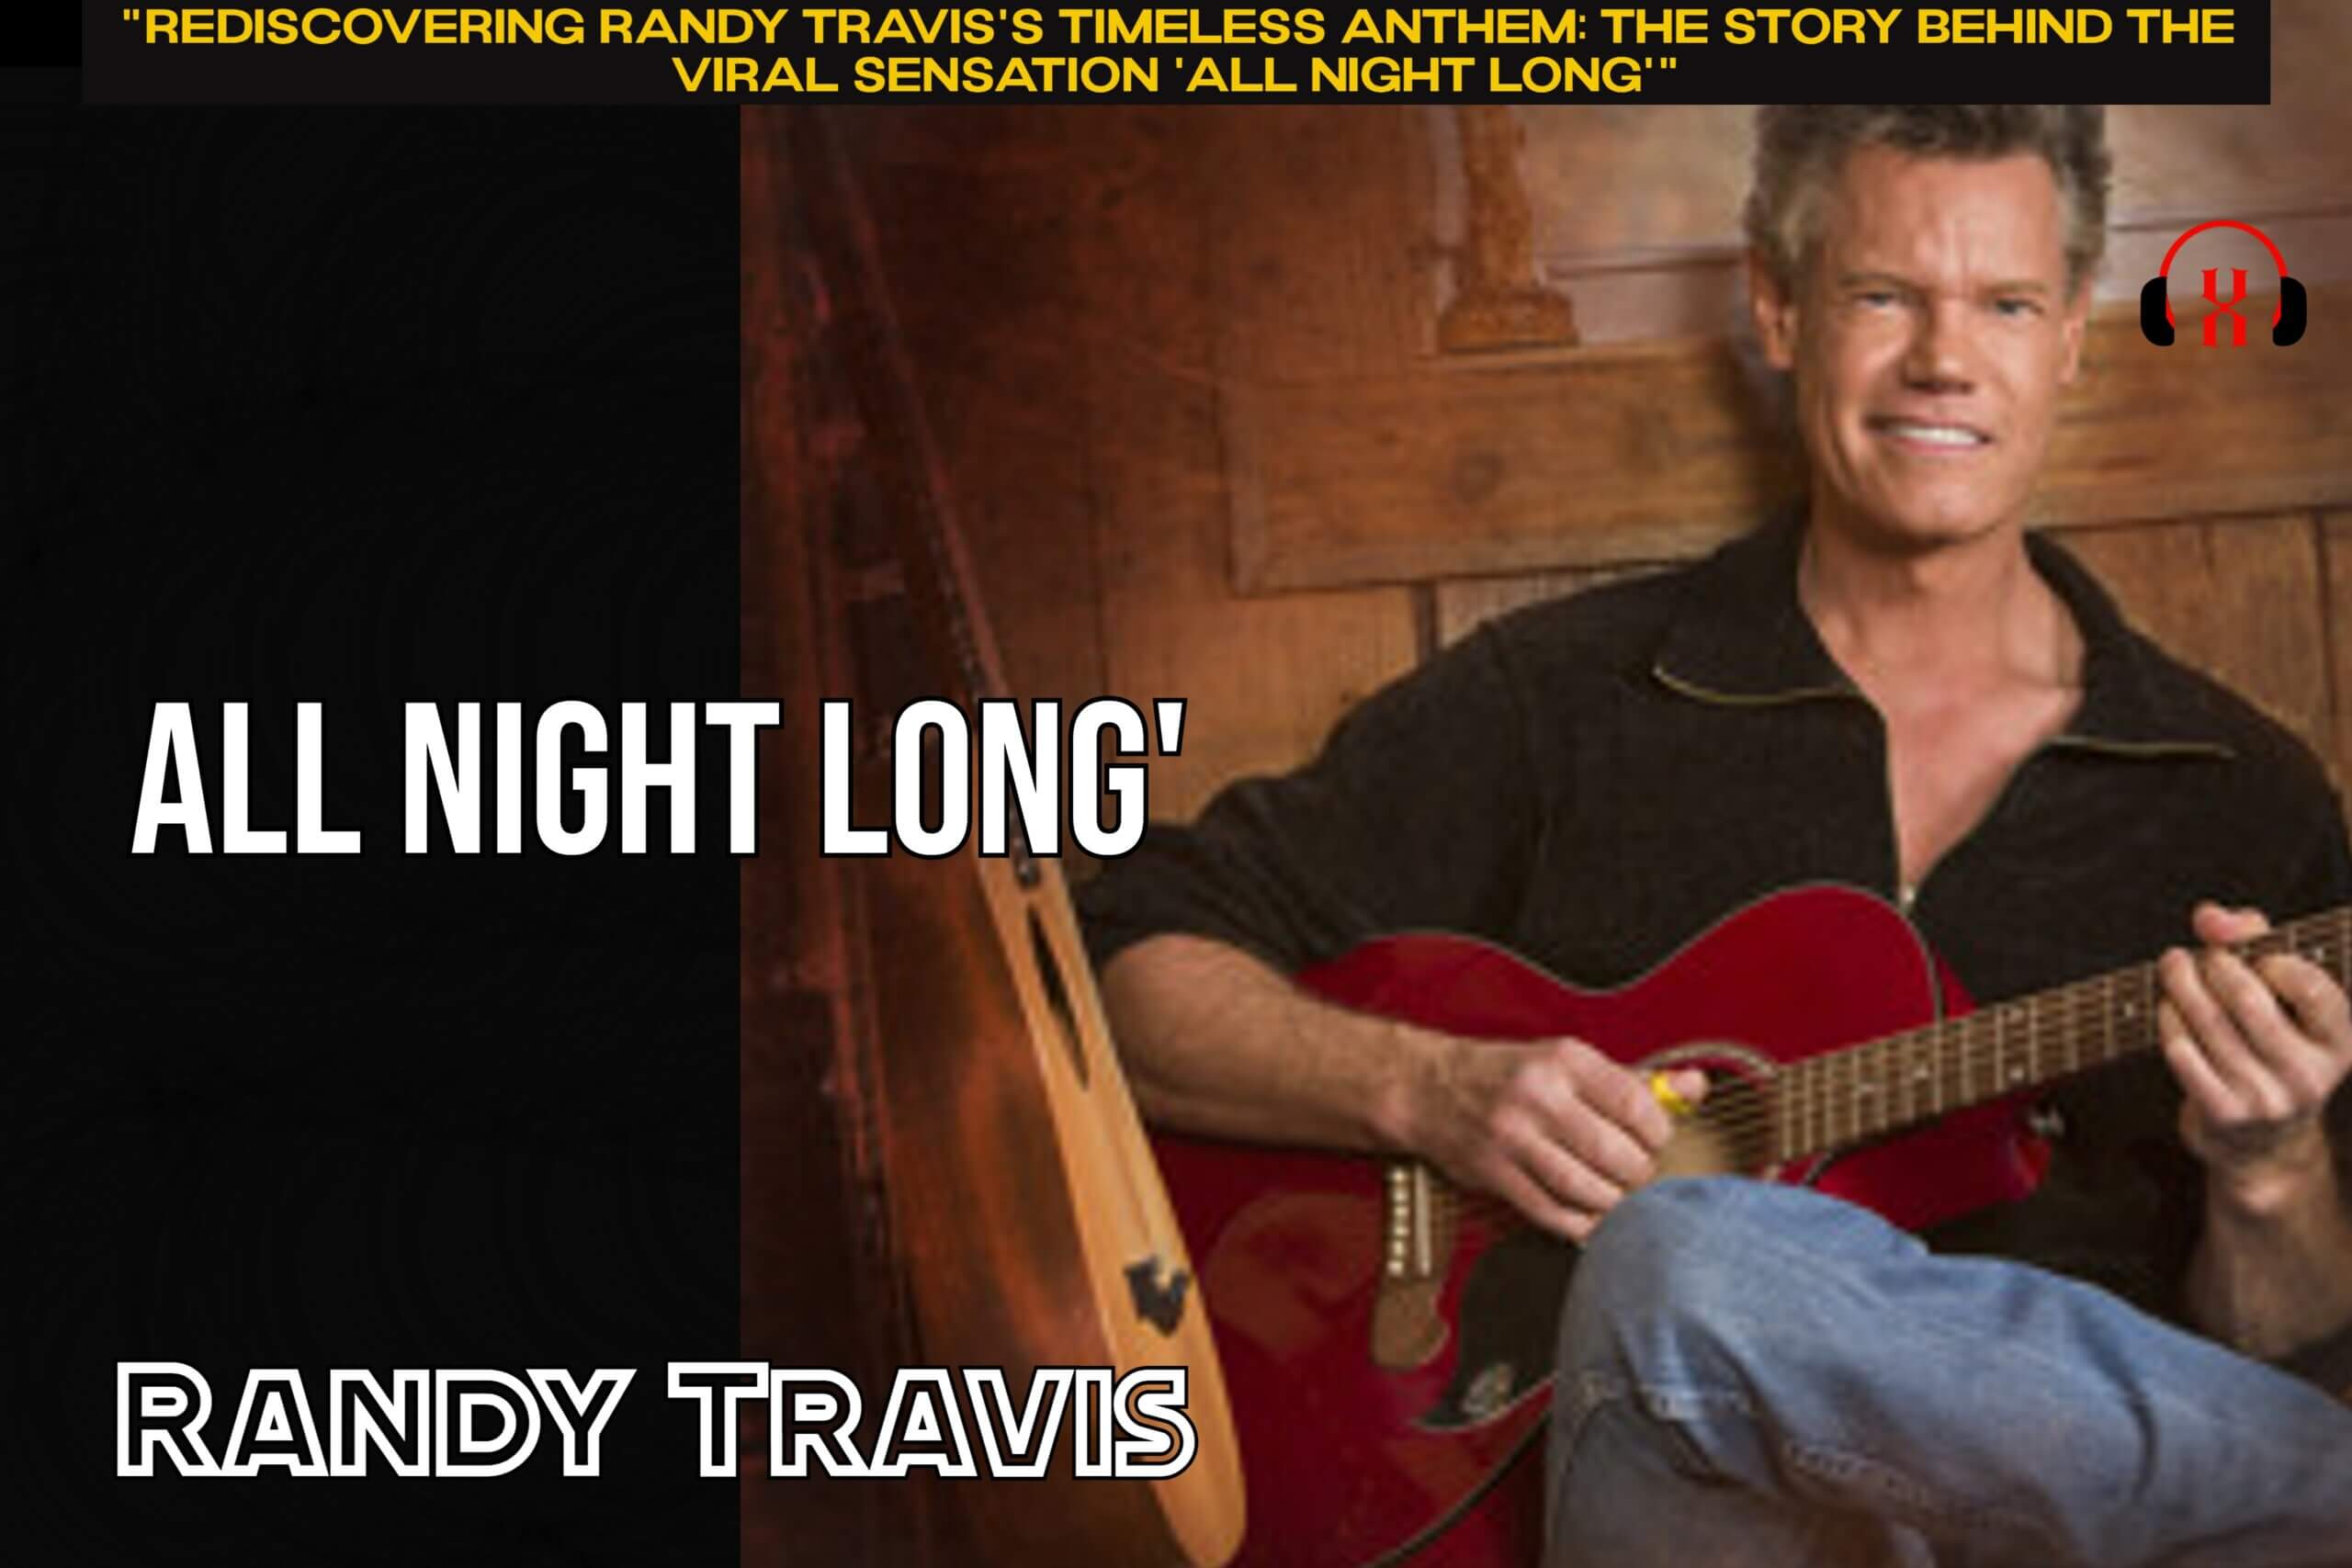 “Rediscovering Randy Travis’s Timeless Anthem: The Story Behind the Viral Sensation ‘All Night Long'”